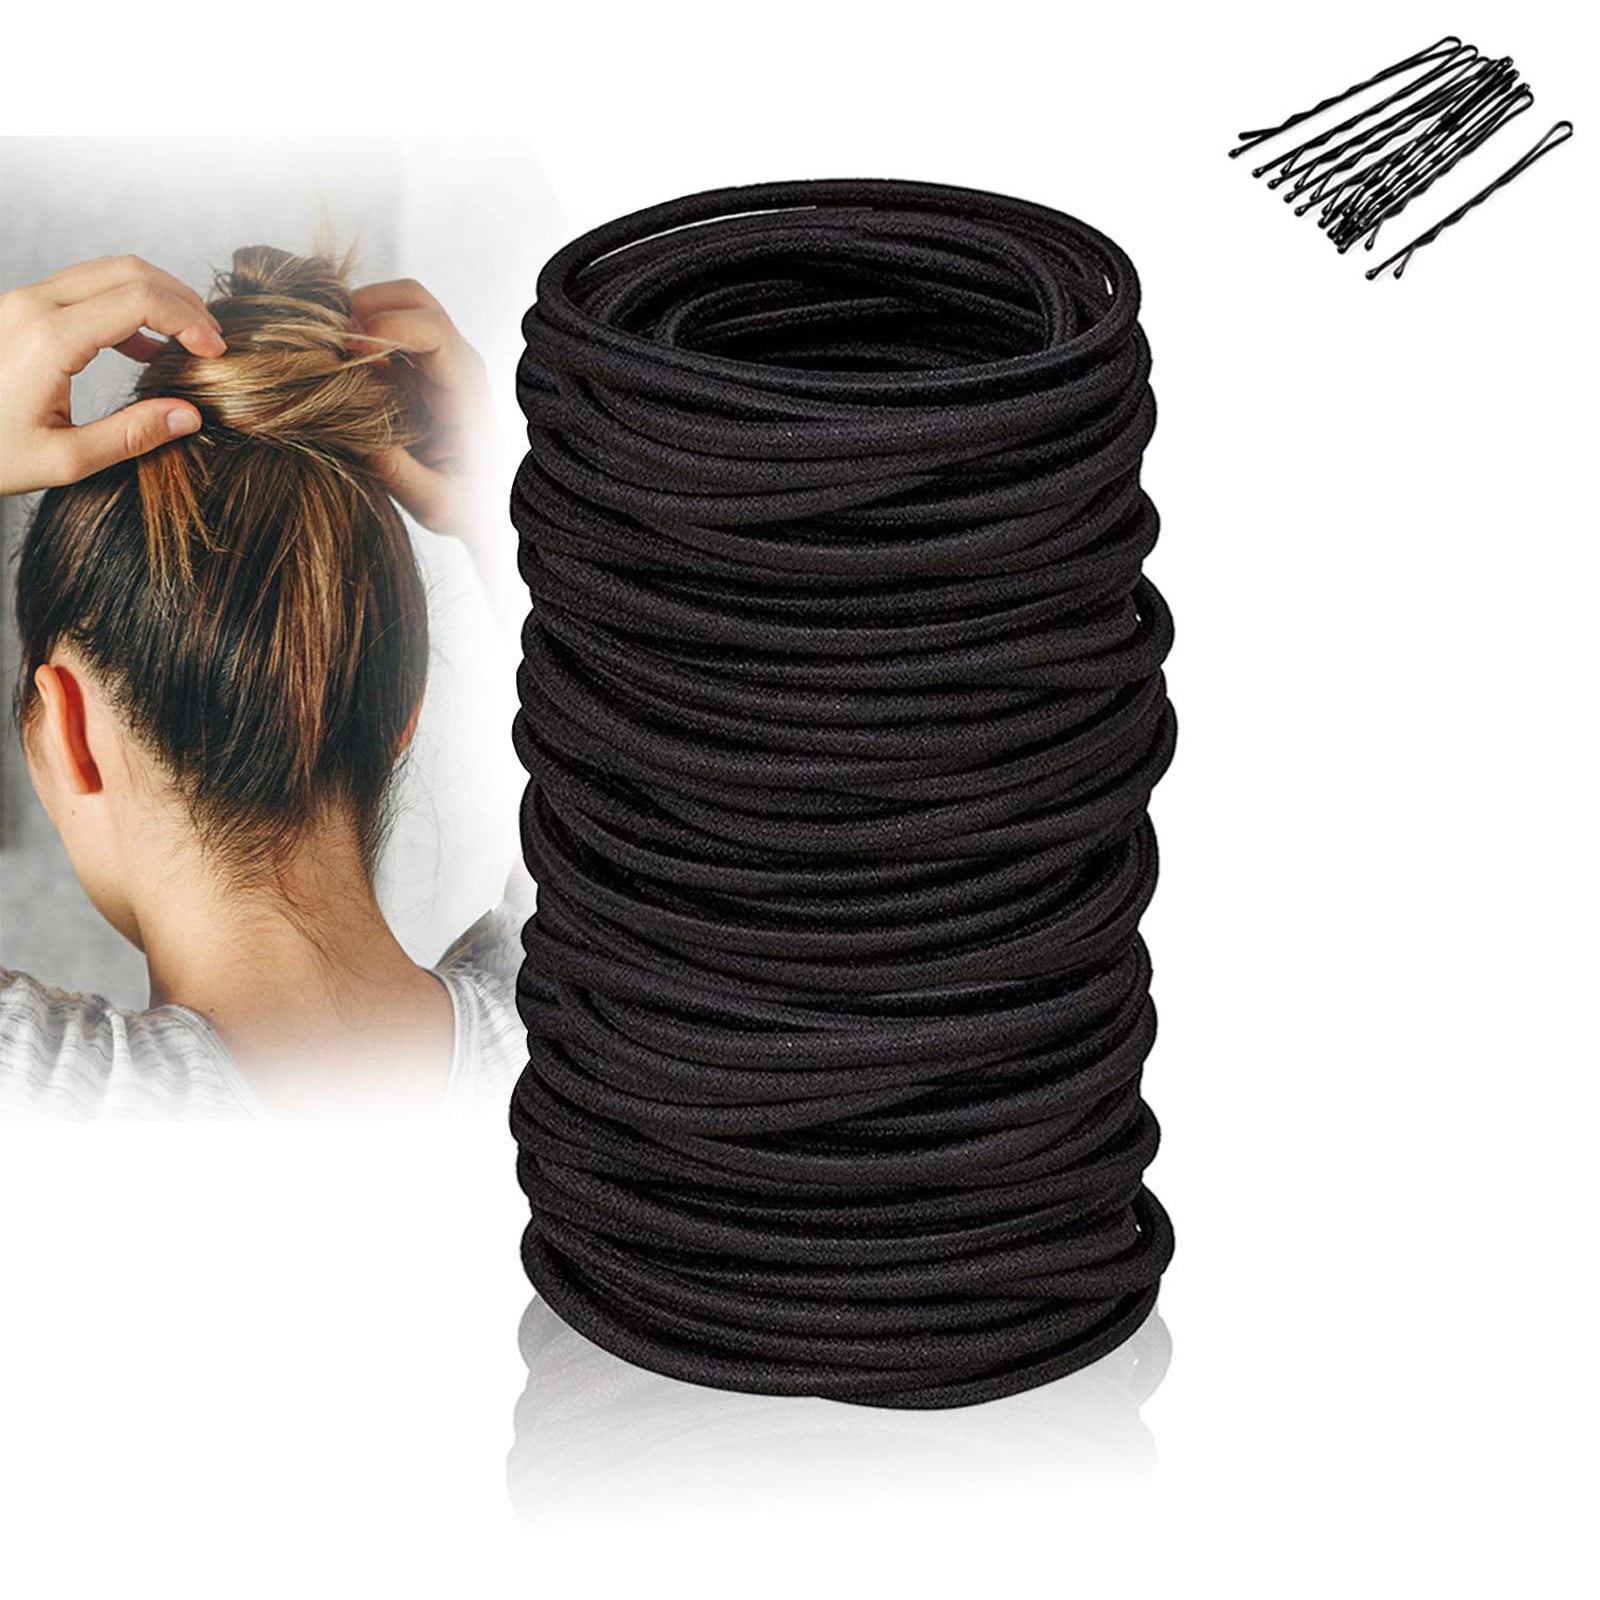 Hair Tie Smooth Solid Color Elastic Cloth Hair Band for Business-Black |  Catch.com.au